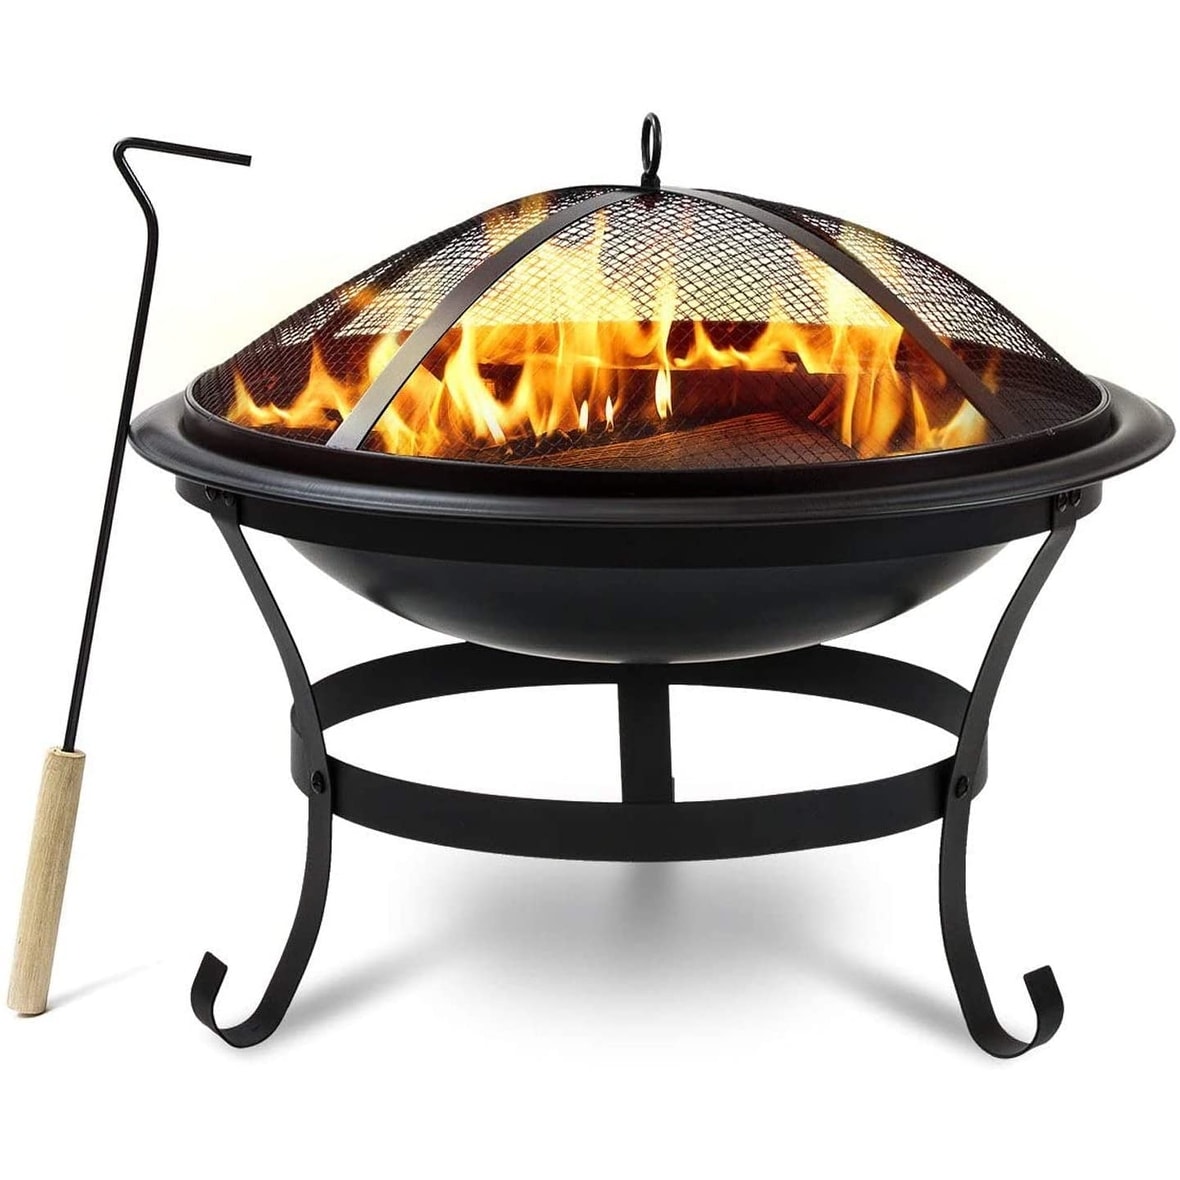 https://ak1.ostkcdn.com/images/products/is/images/direct/ad396157f7eaf95b6b6a71586fee320a5605d3cc/Pyramid-Home-Decor-Portable-Fire-Pit-Outdoor-Wood-Burning-and-Grill.jpg